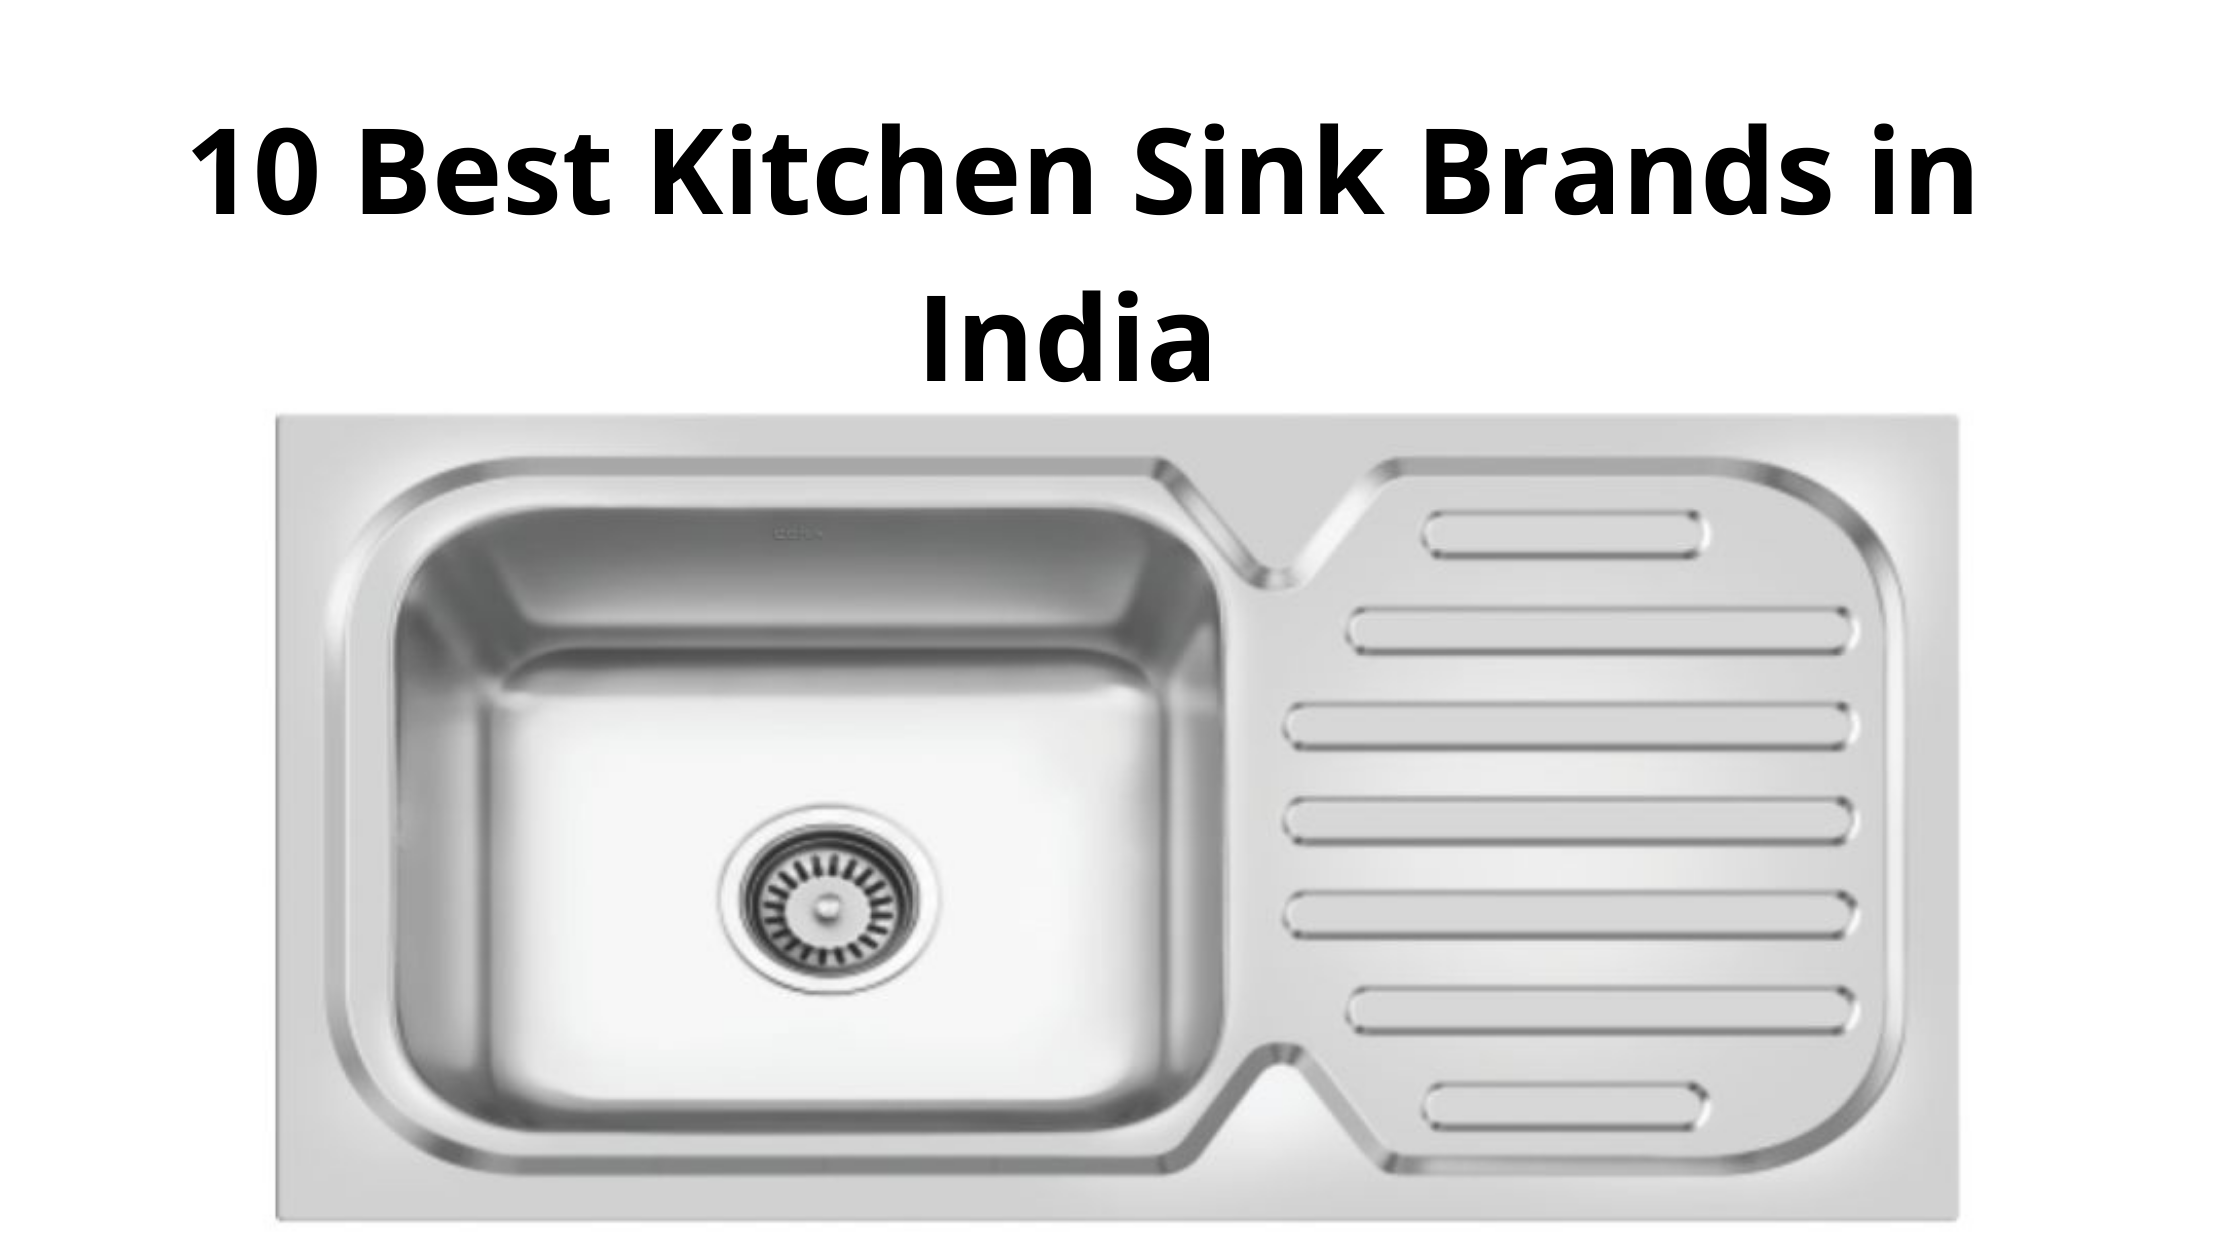 10 Best Kitchen Sink Brands in India Reviews and Comparison